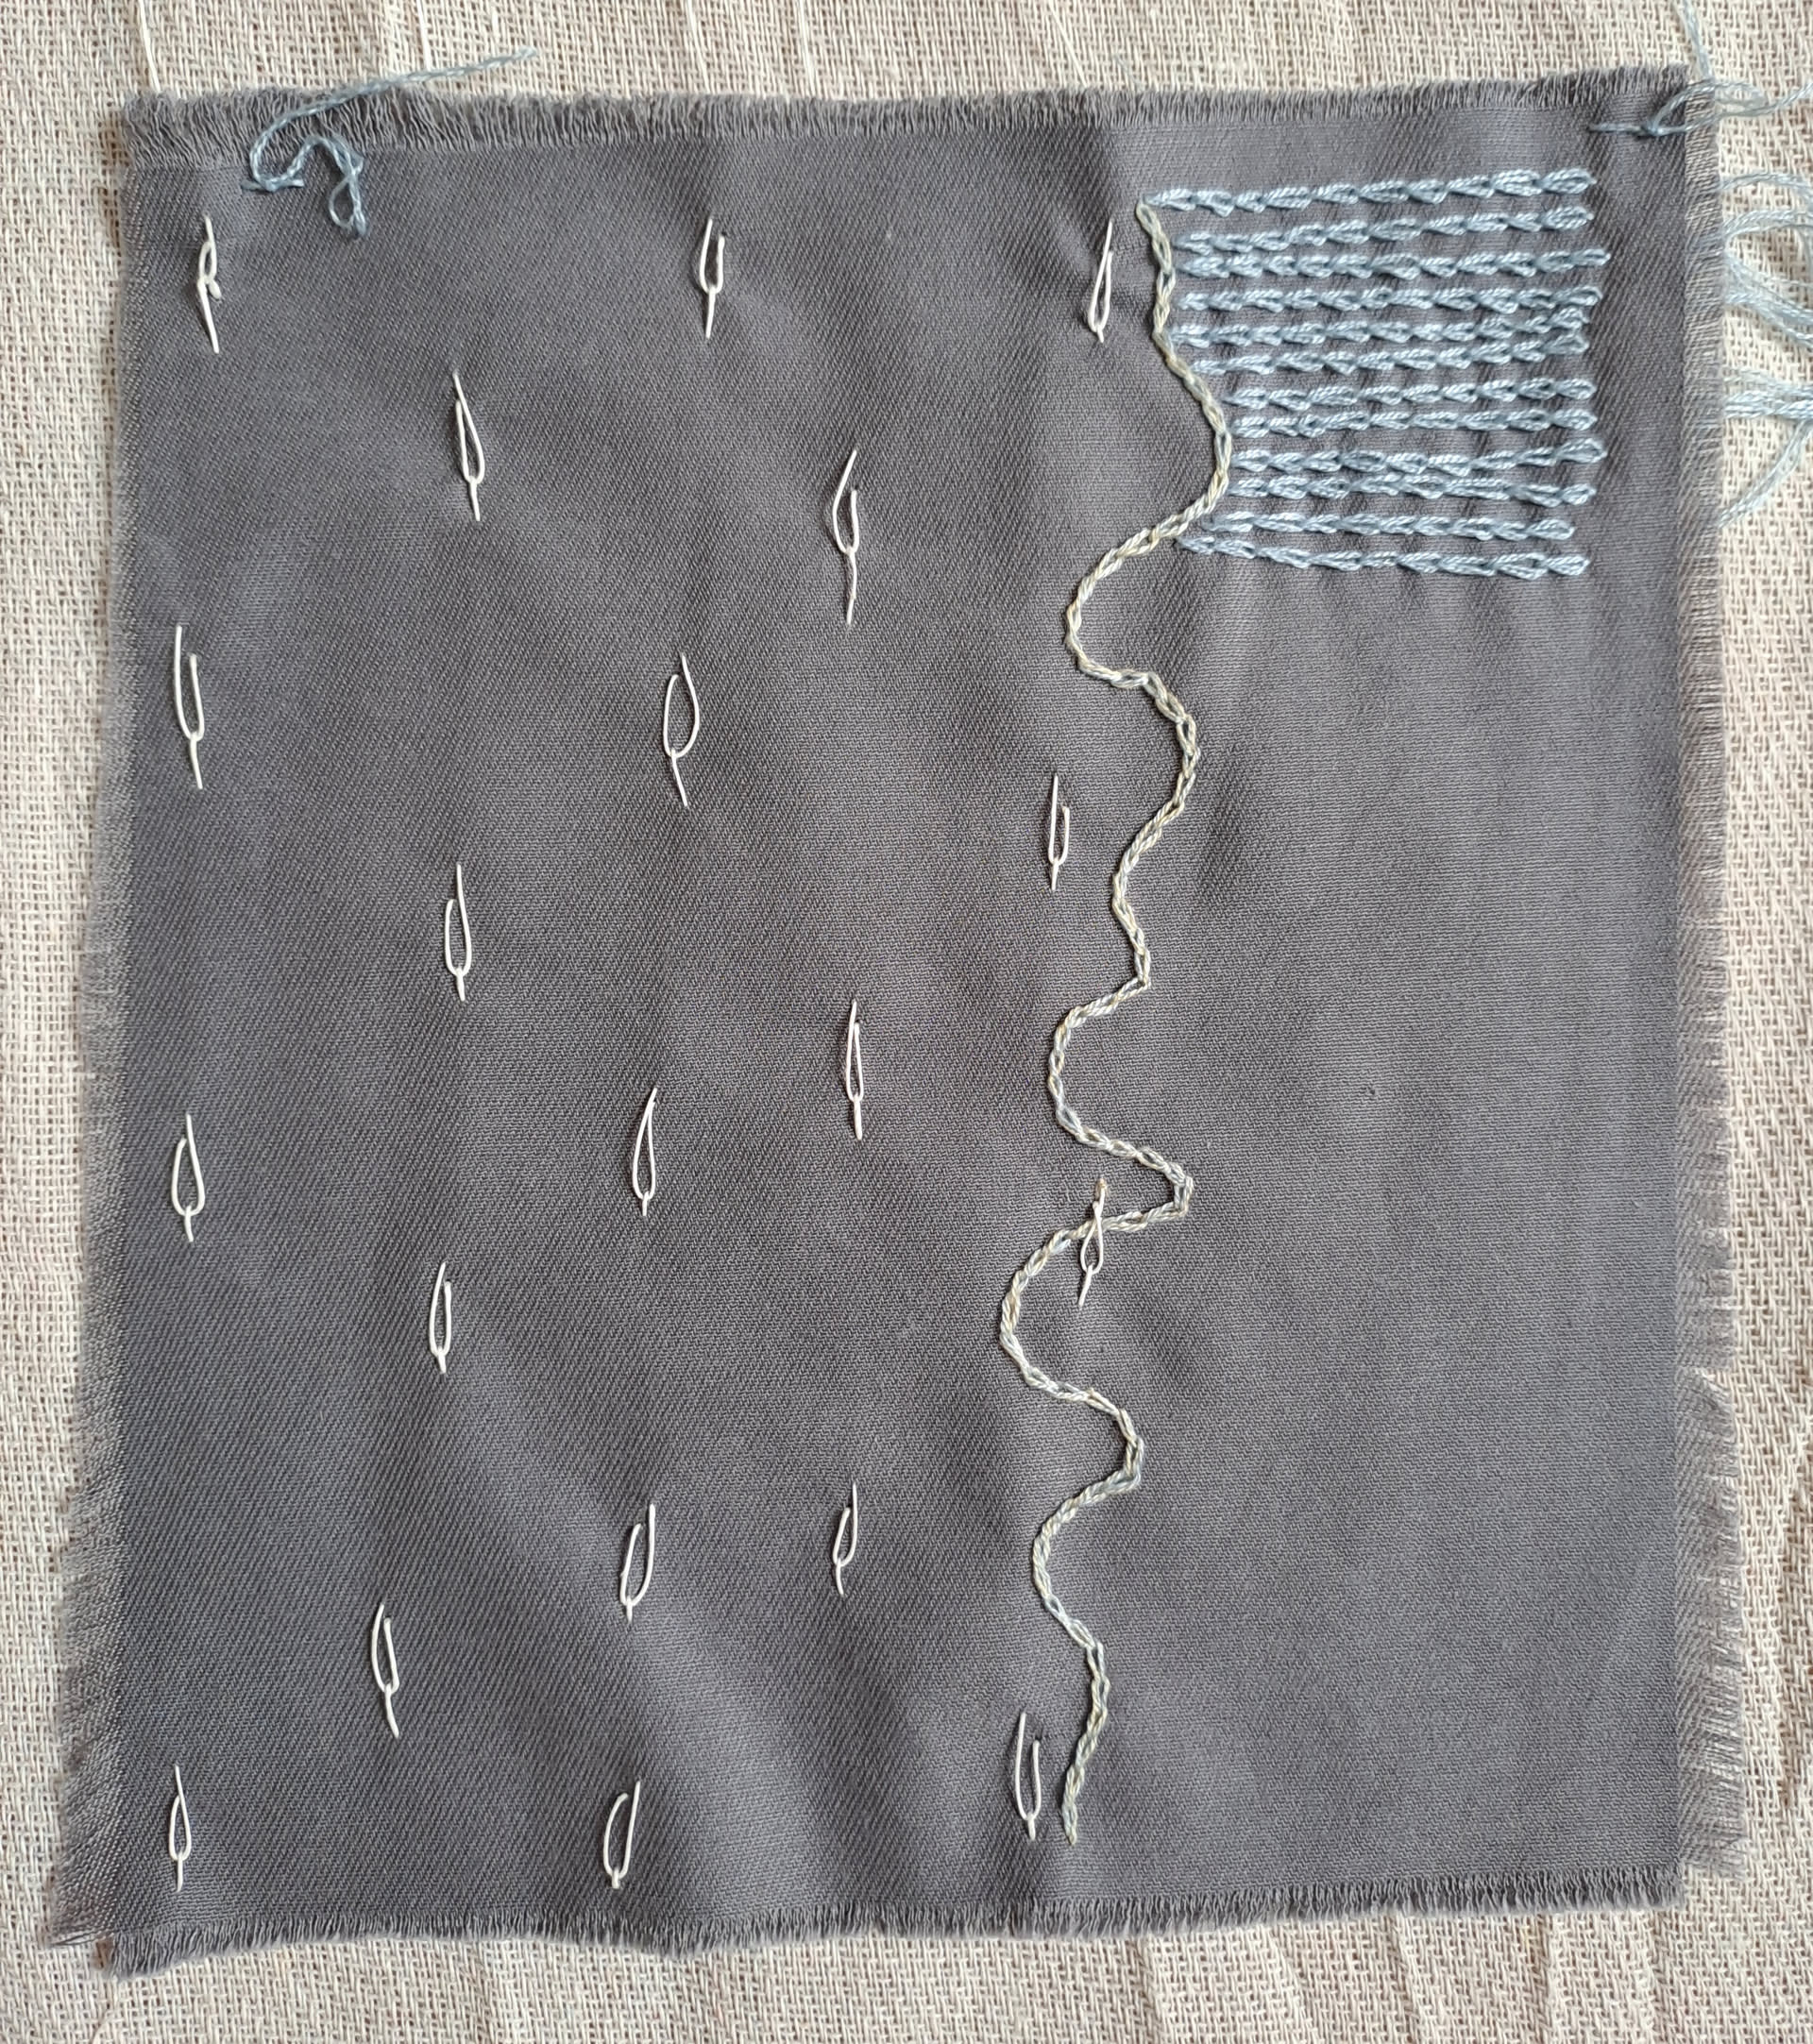 Image of paper with embroidery